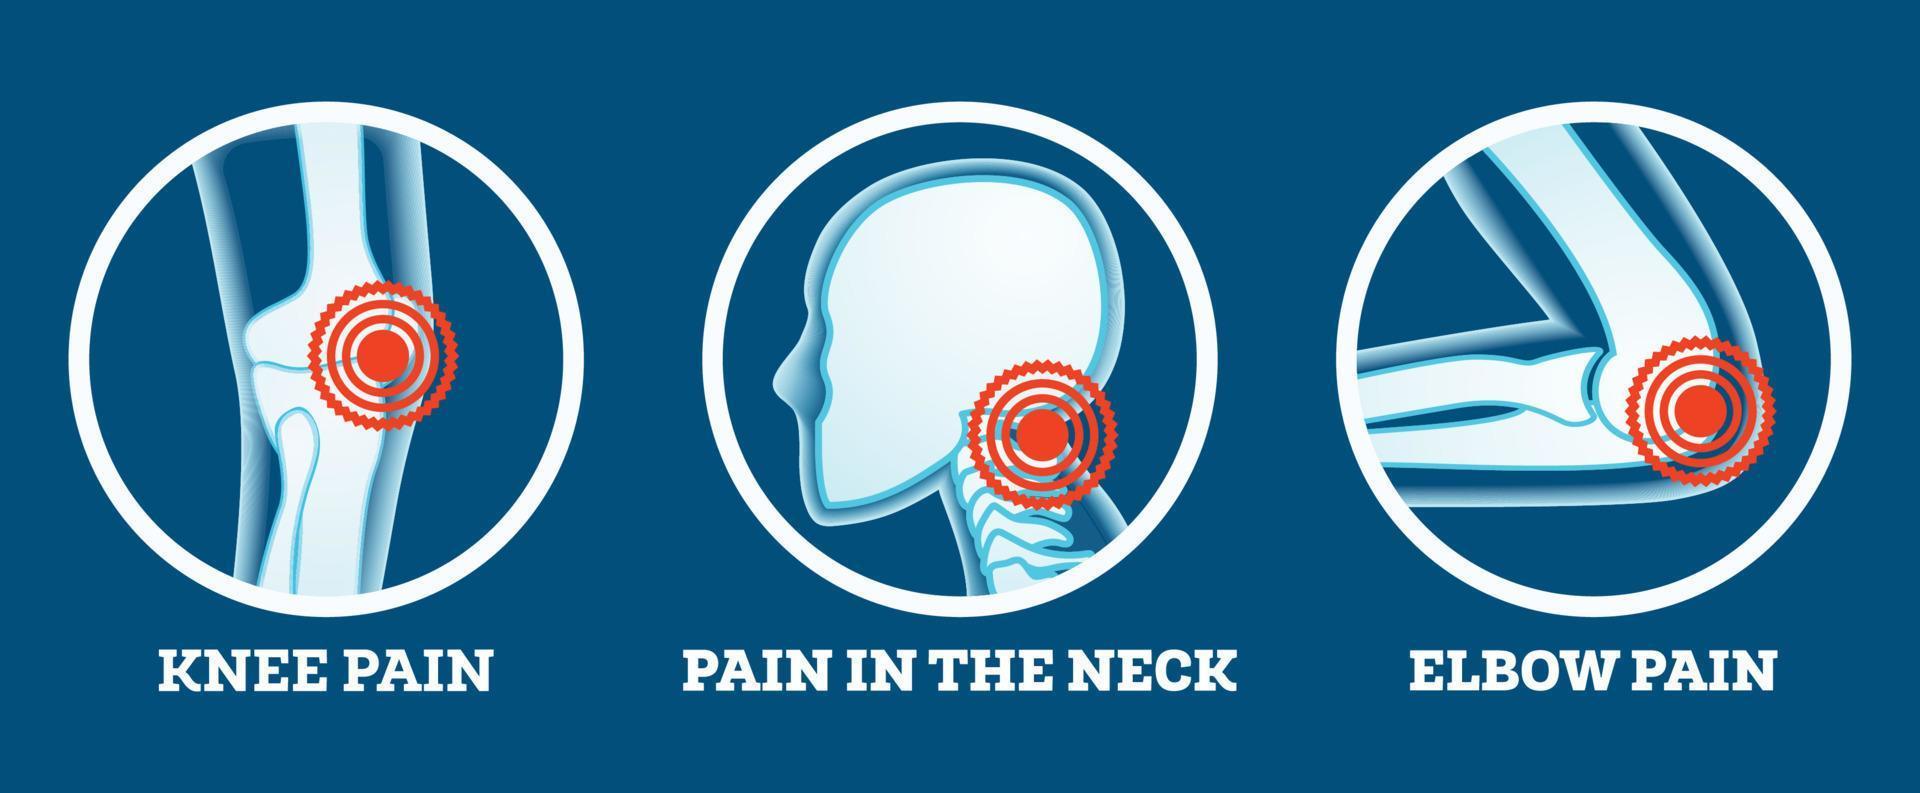 Body Pain. Icons Set. Pain in Knee, Neck and Elbow. Woman's and Man's Body Parts. vector